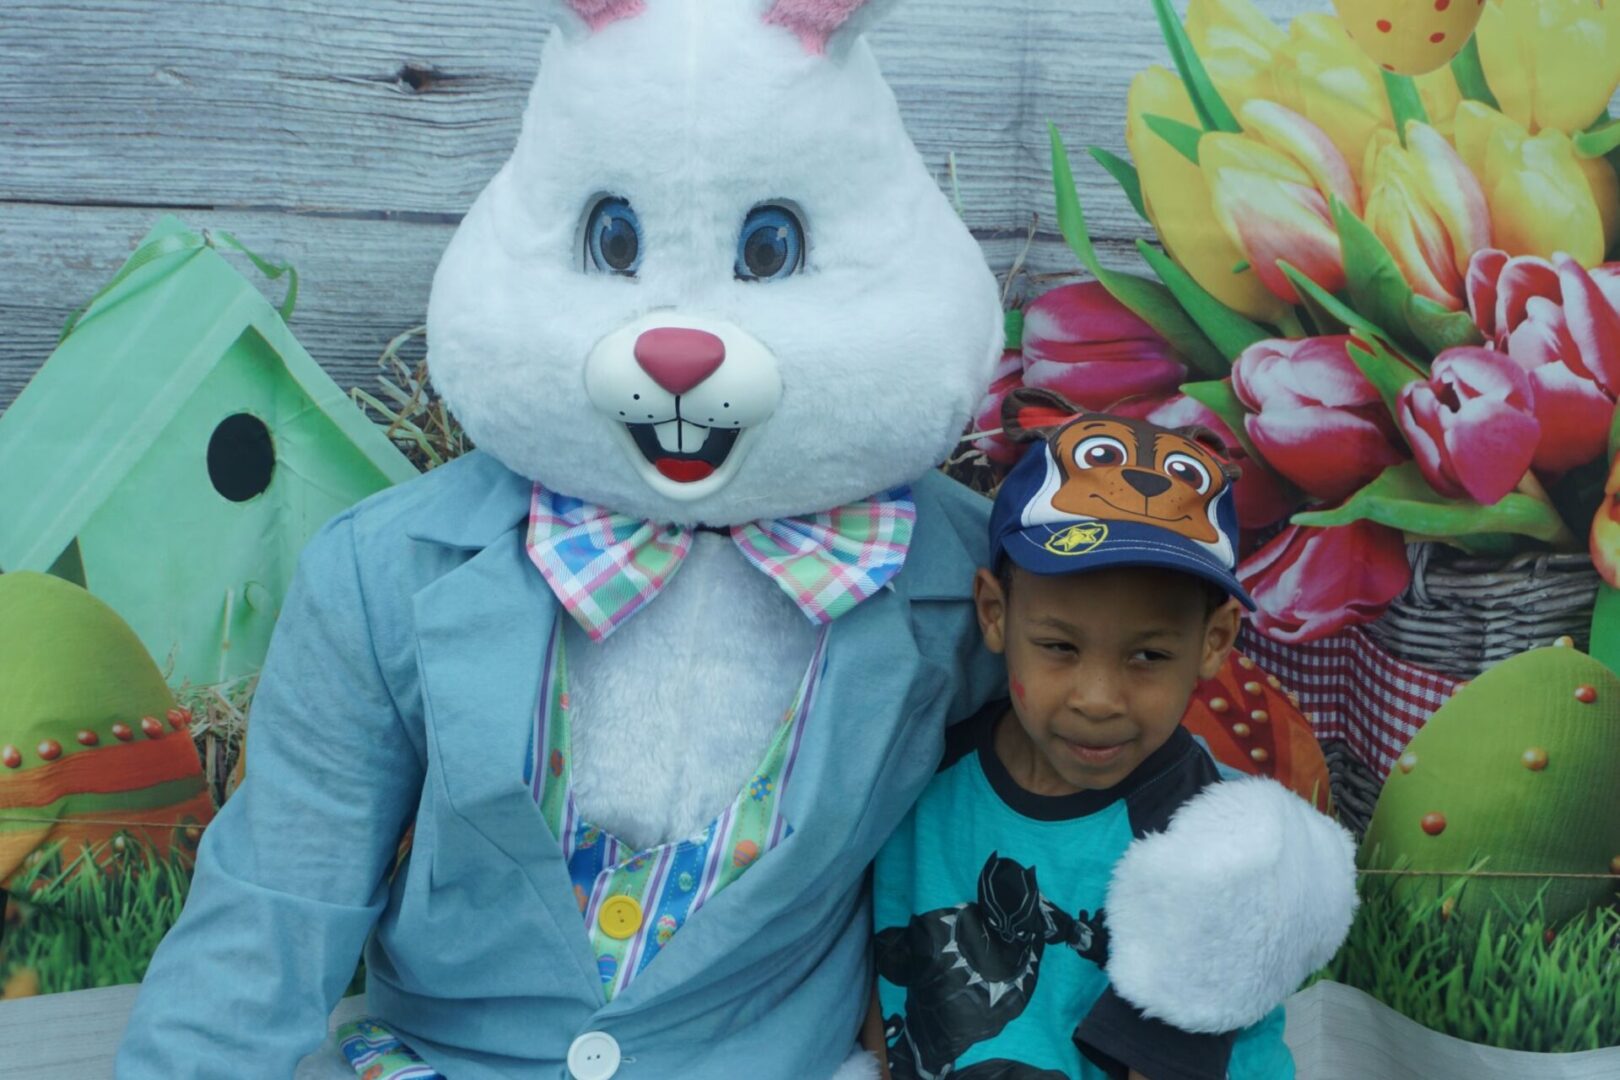 The bunny mascot and a boy wearing a blue cap